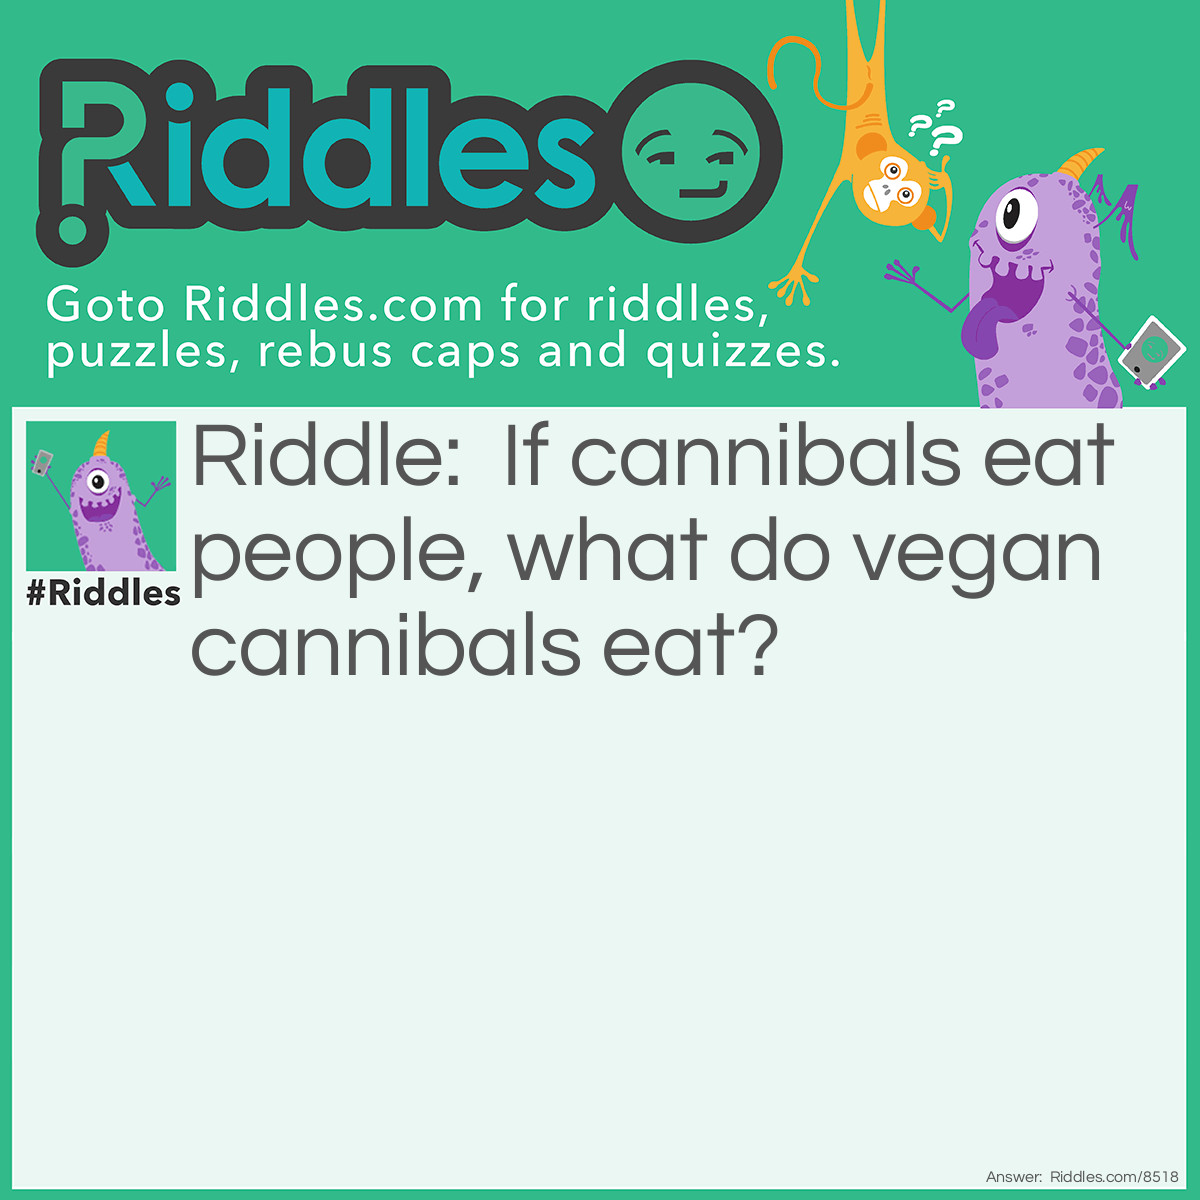 Riddle: If cannibals eat people, what do vegan cannibals eat? Answer: Nothing! Vegan cannibals are impossible!